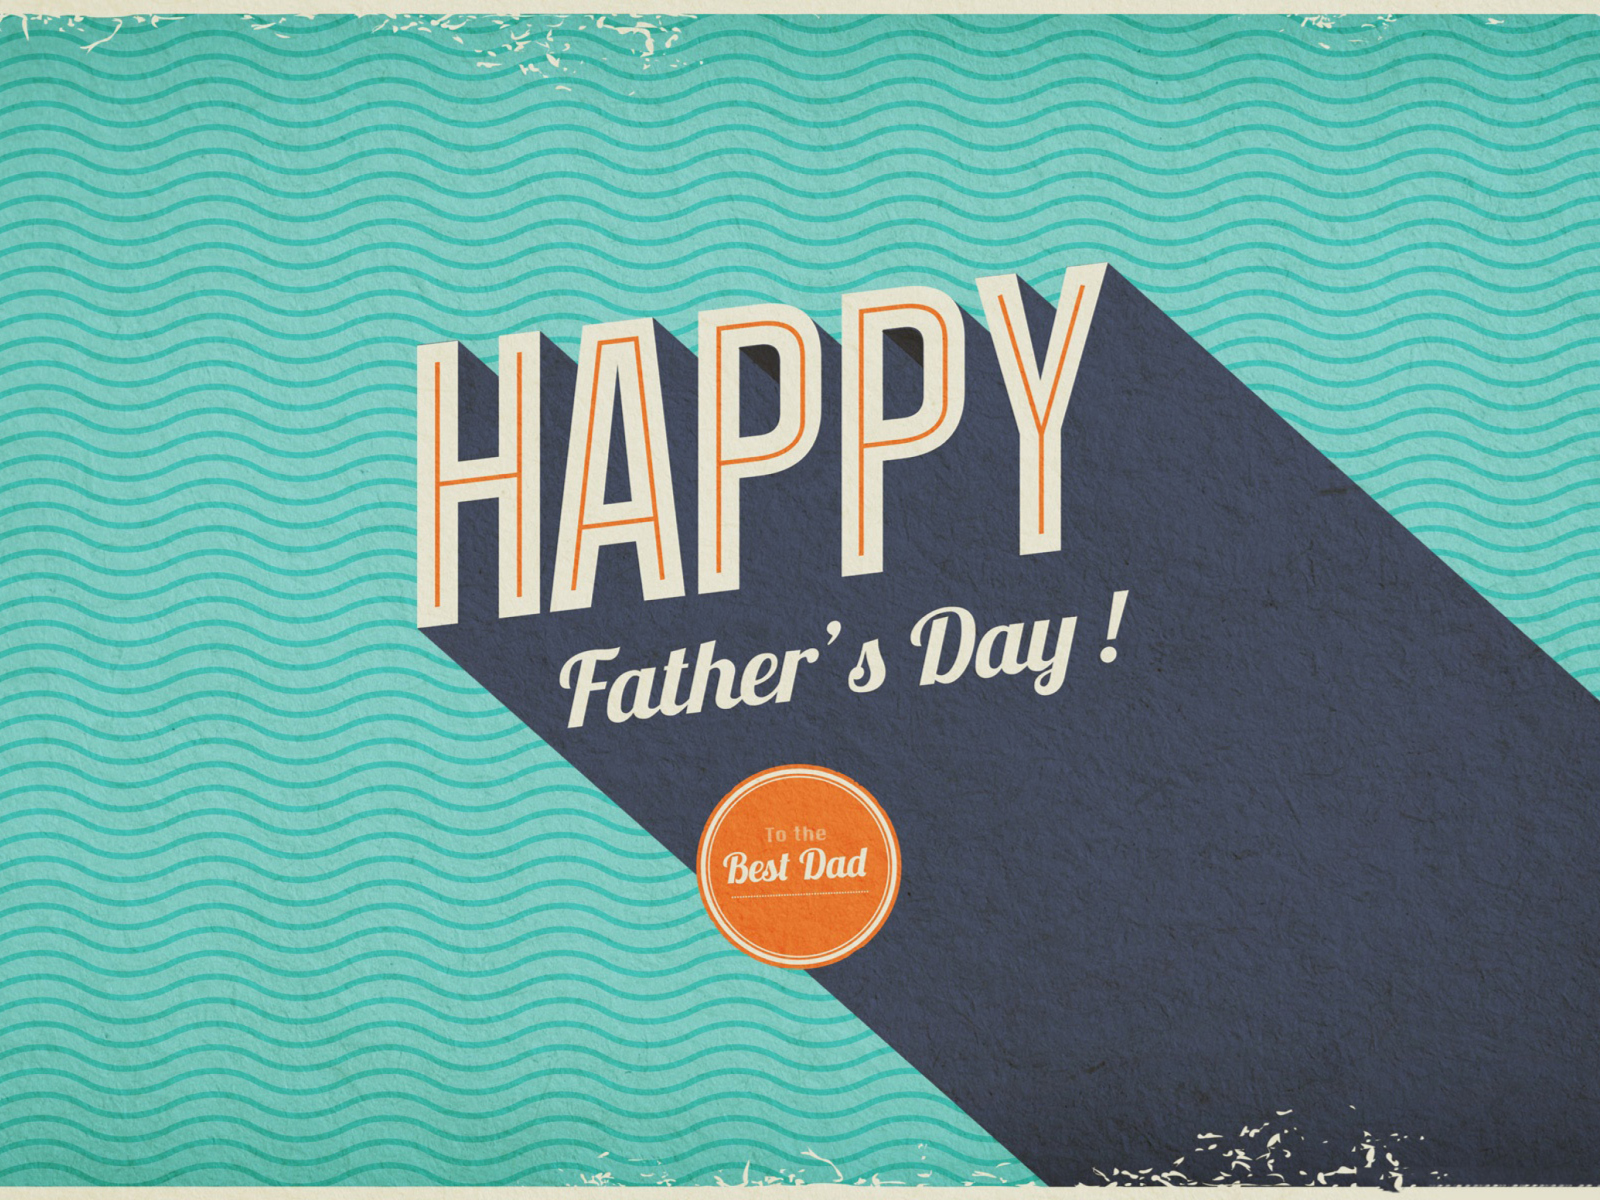 Happy Fathers Day wallpaper 1600x1200